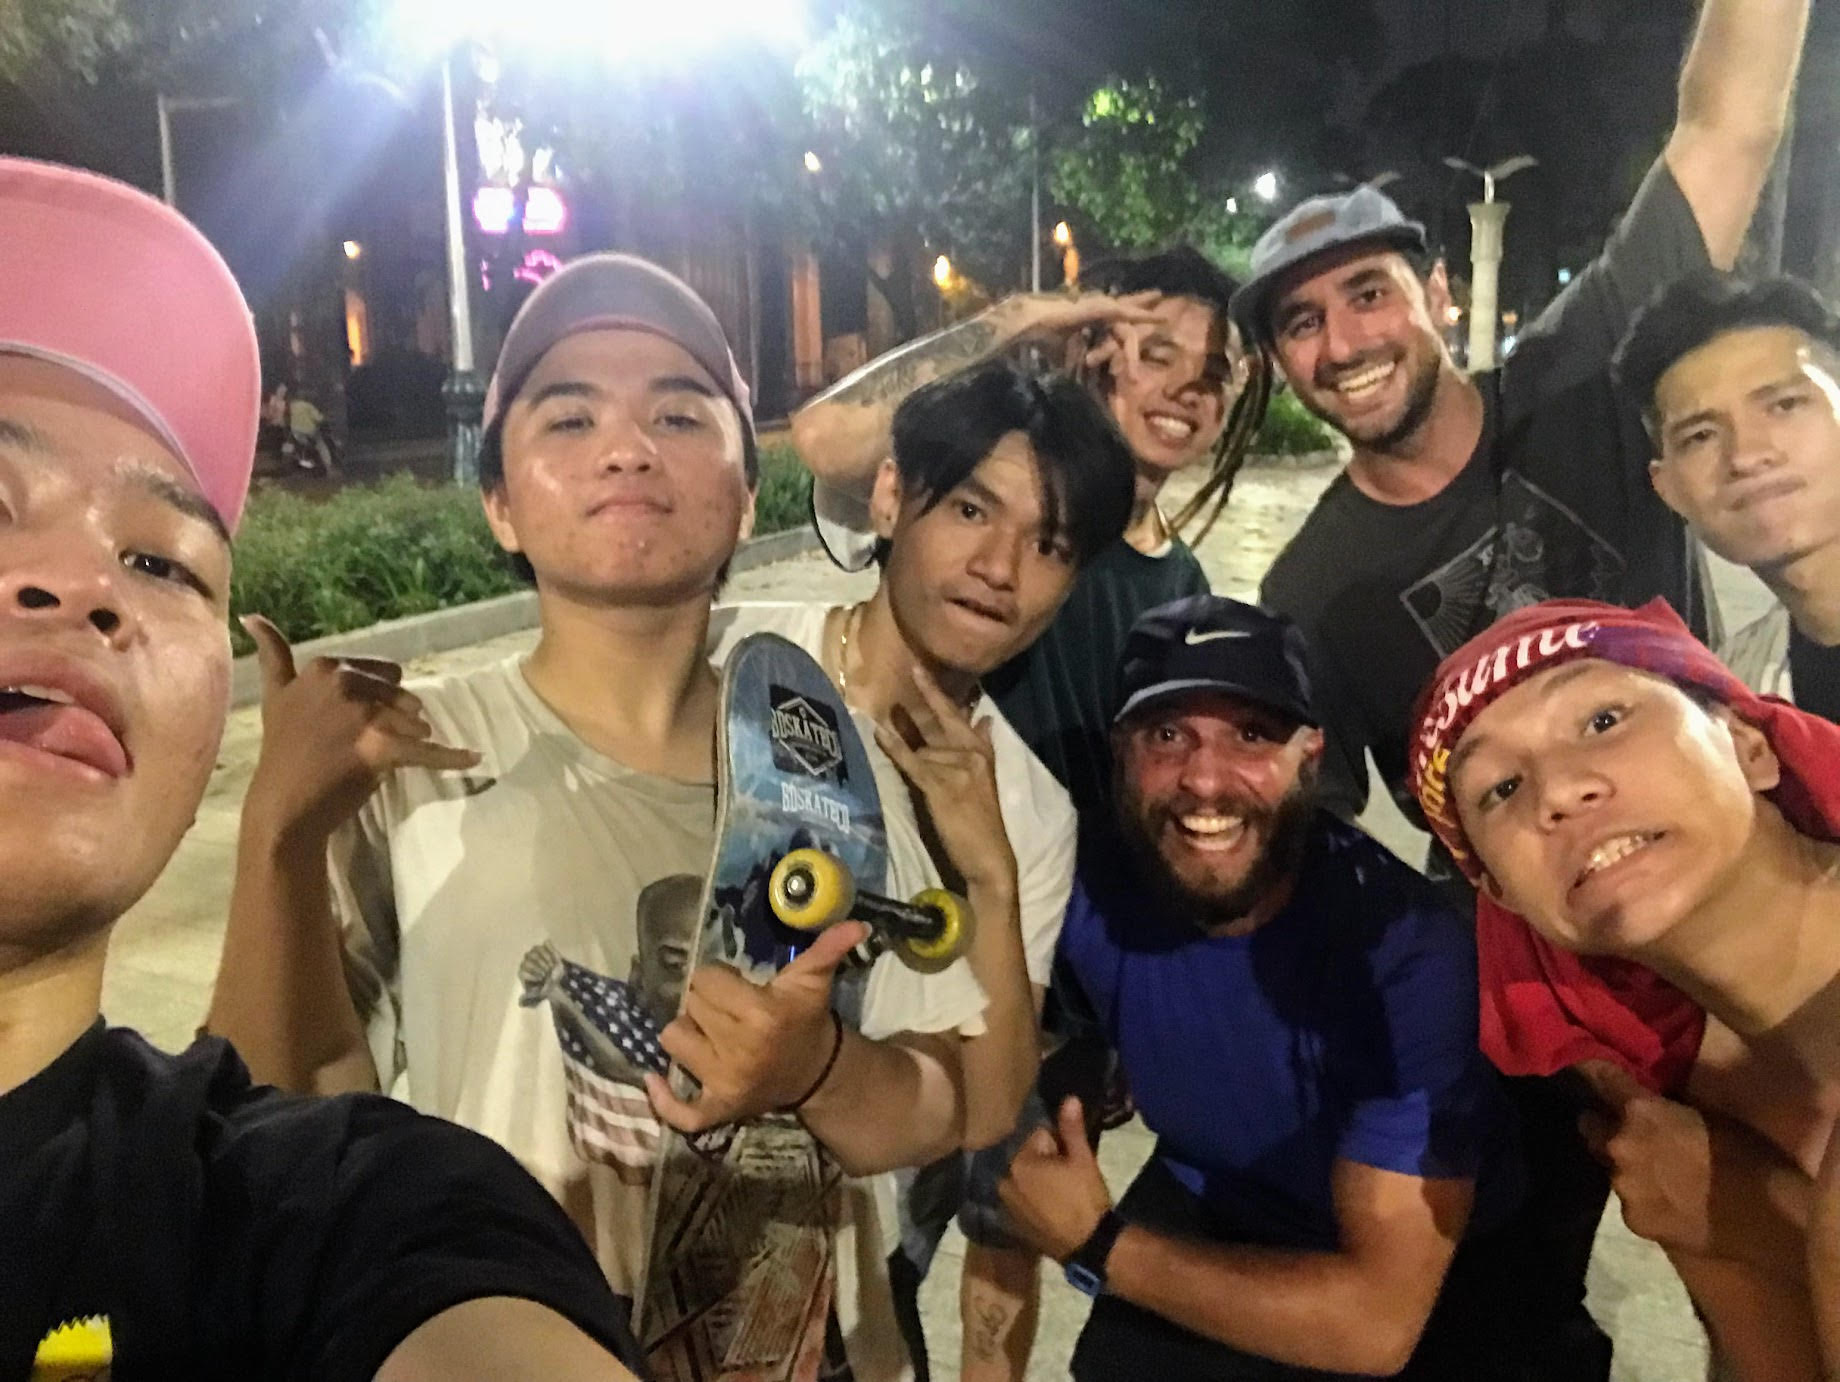 Collectivist culture and the skate communities of Southeast Asia & Latin America